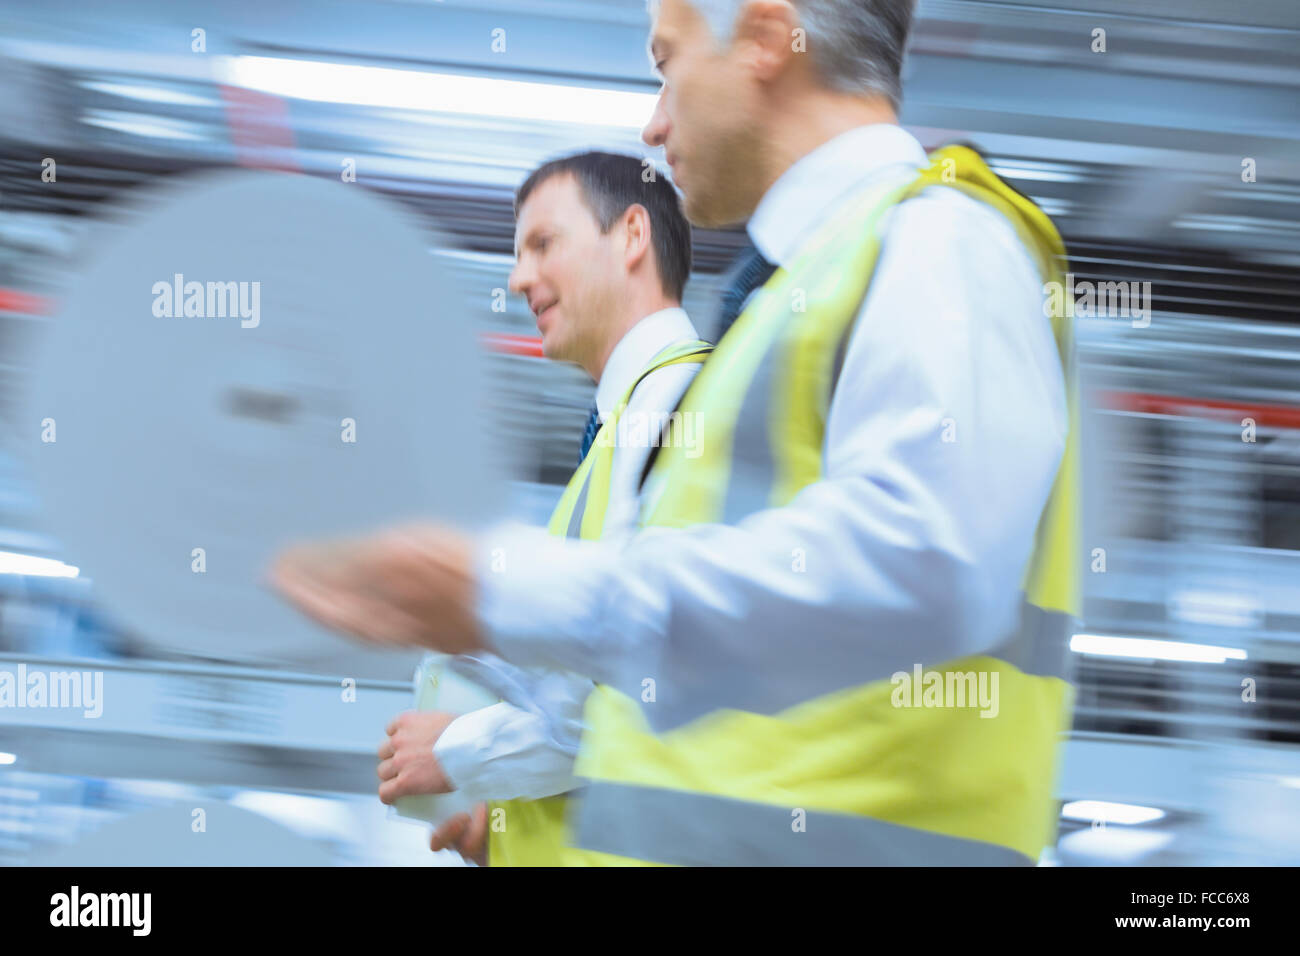 Workers in reflective clothing walking in factory Stock Photo